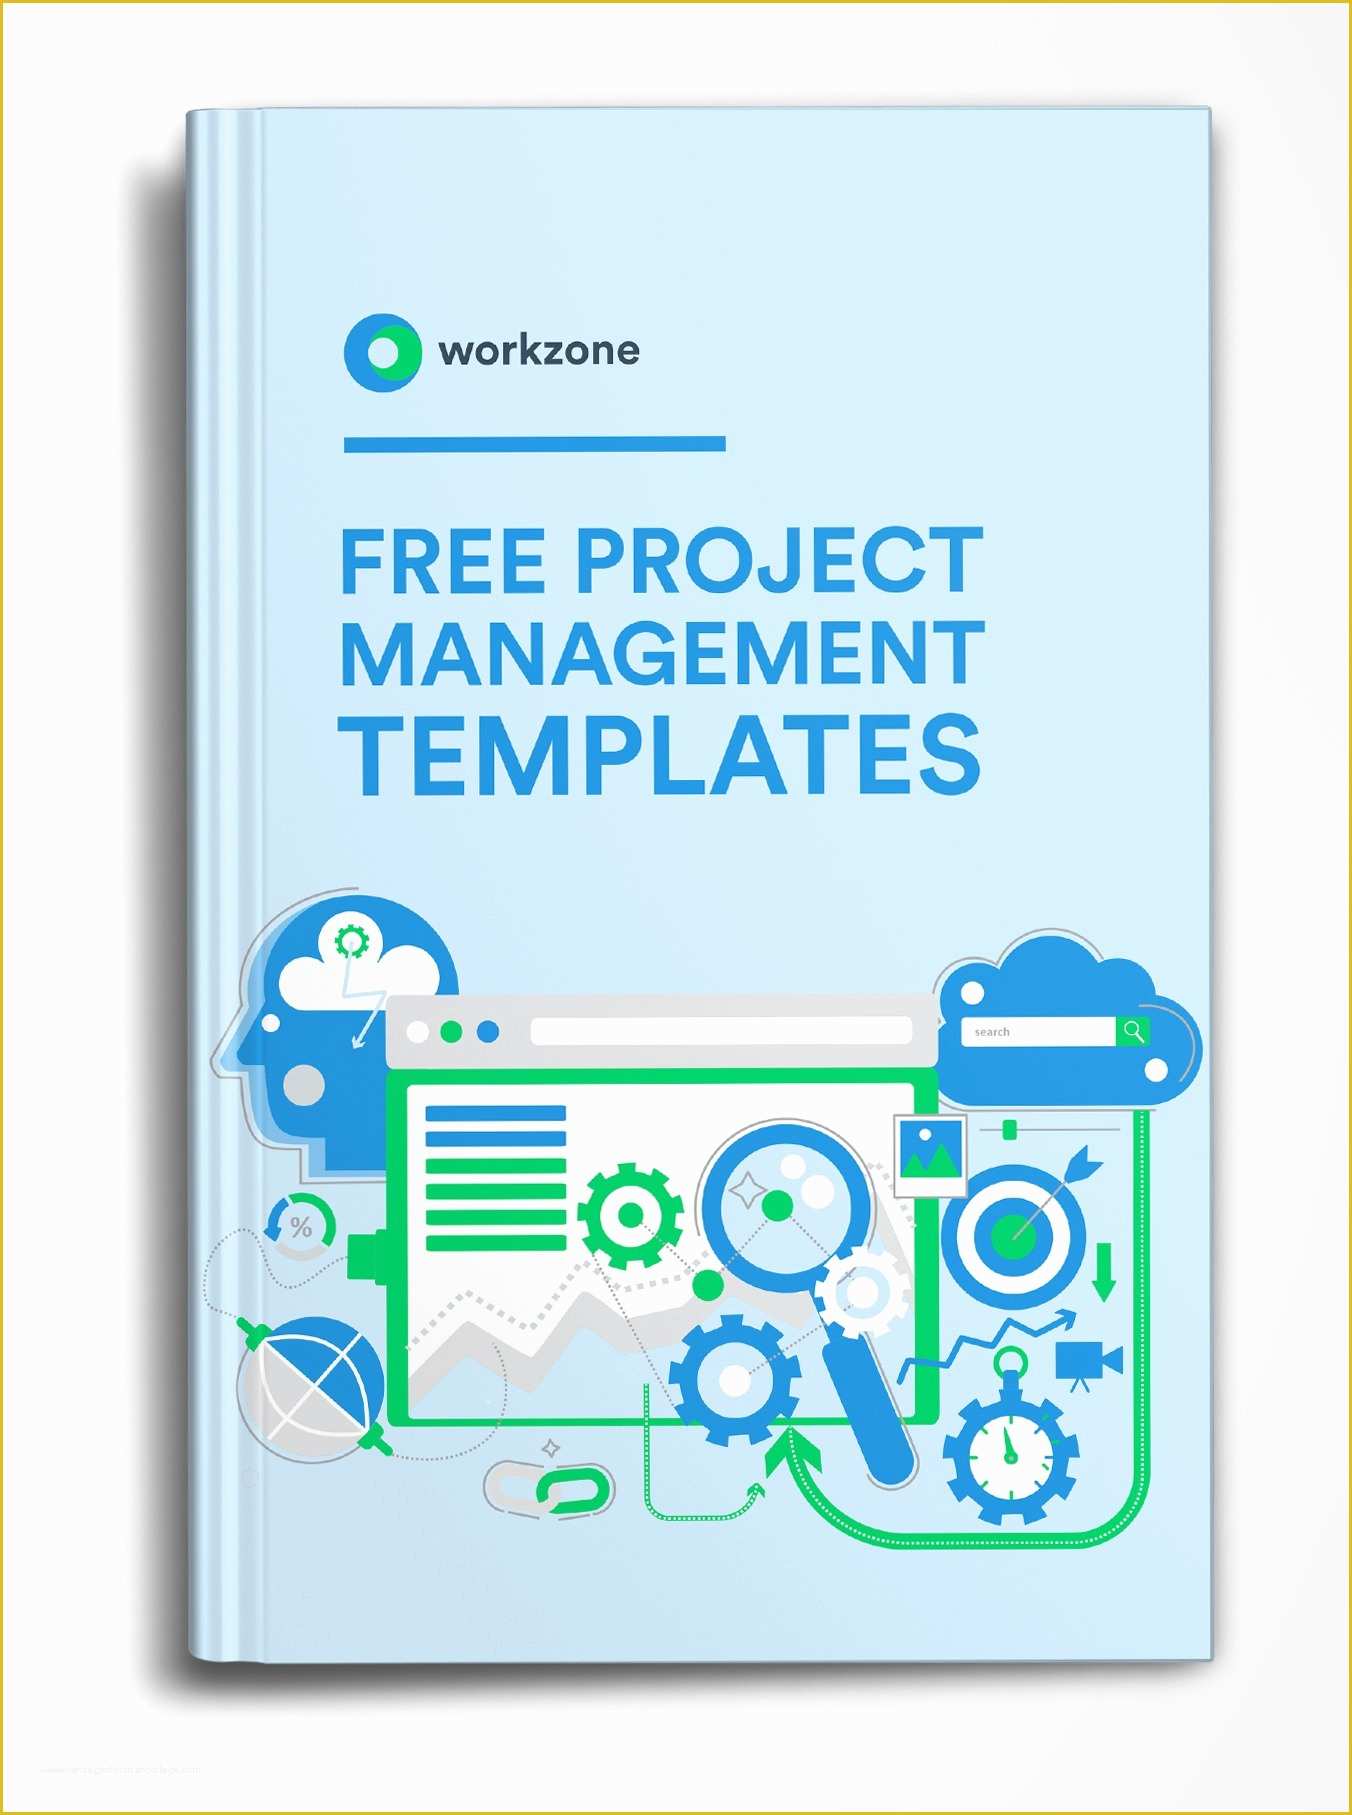 Free Project Management Templates Of 10 Awesome Project Management Basics for Struggle Free Success